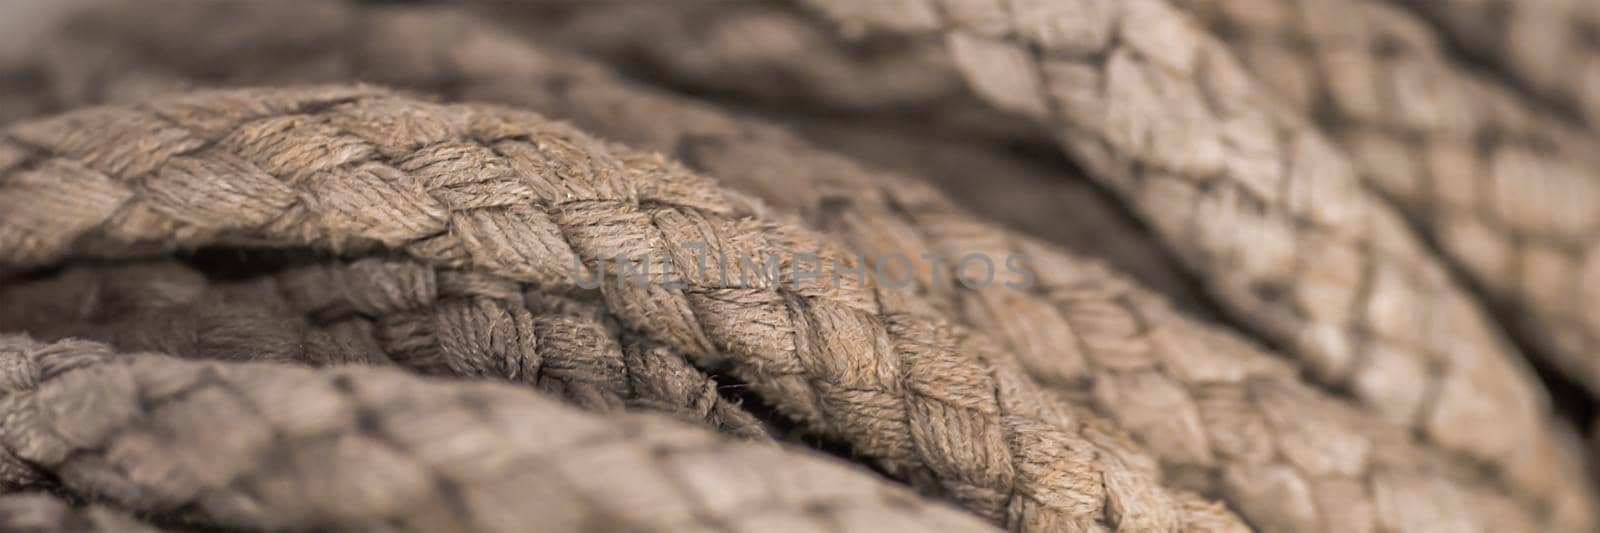 Thick tangled rope close up. Close-up of an old worn out boat rope as a nautical background. by SERSOL